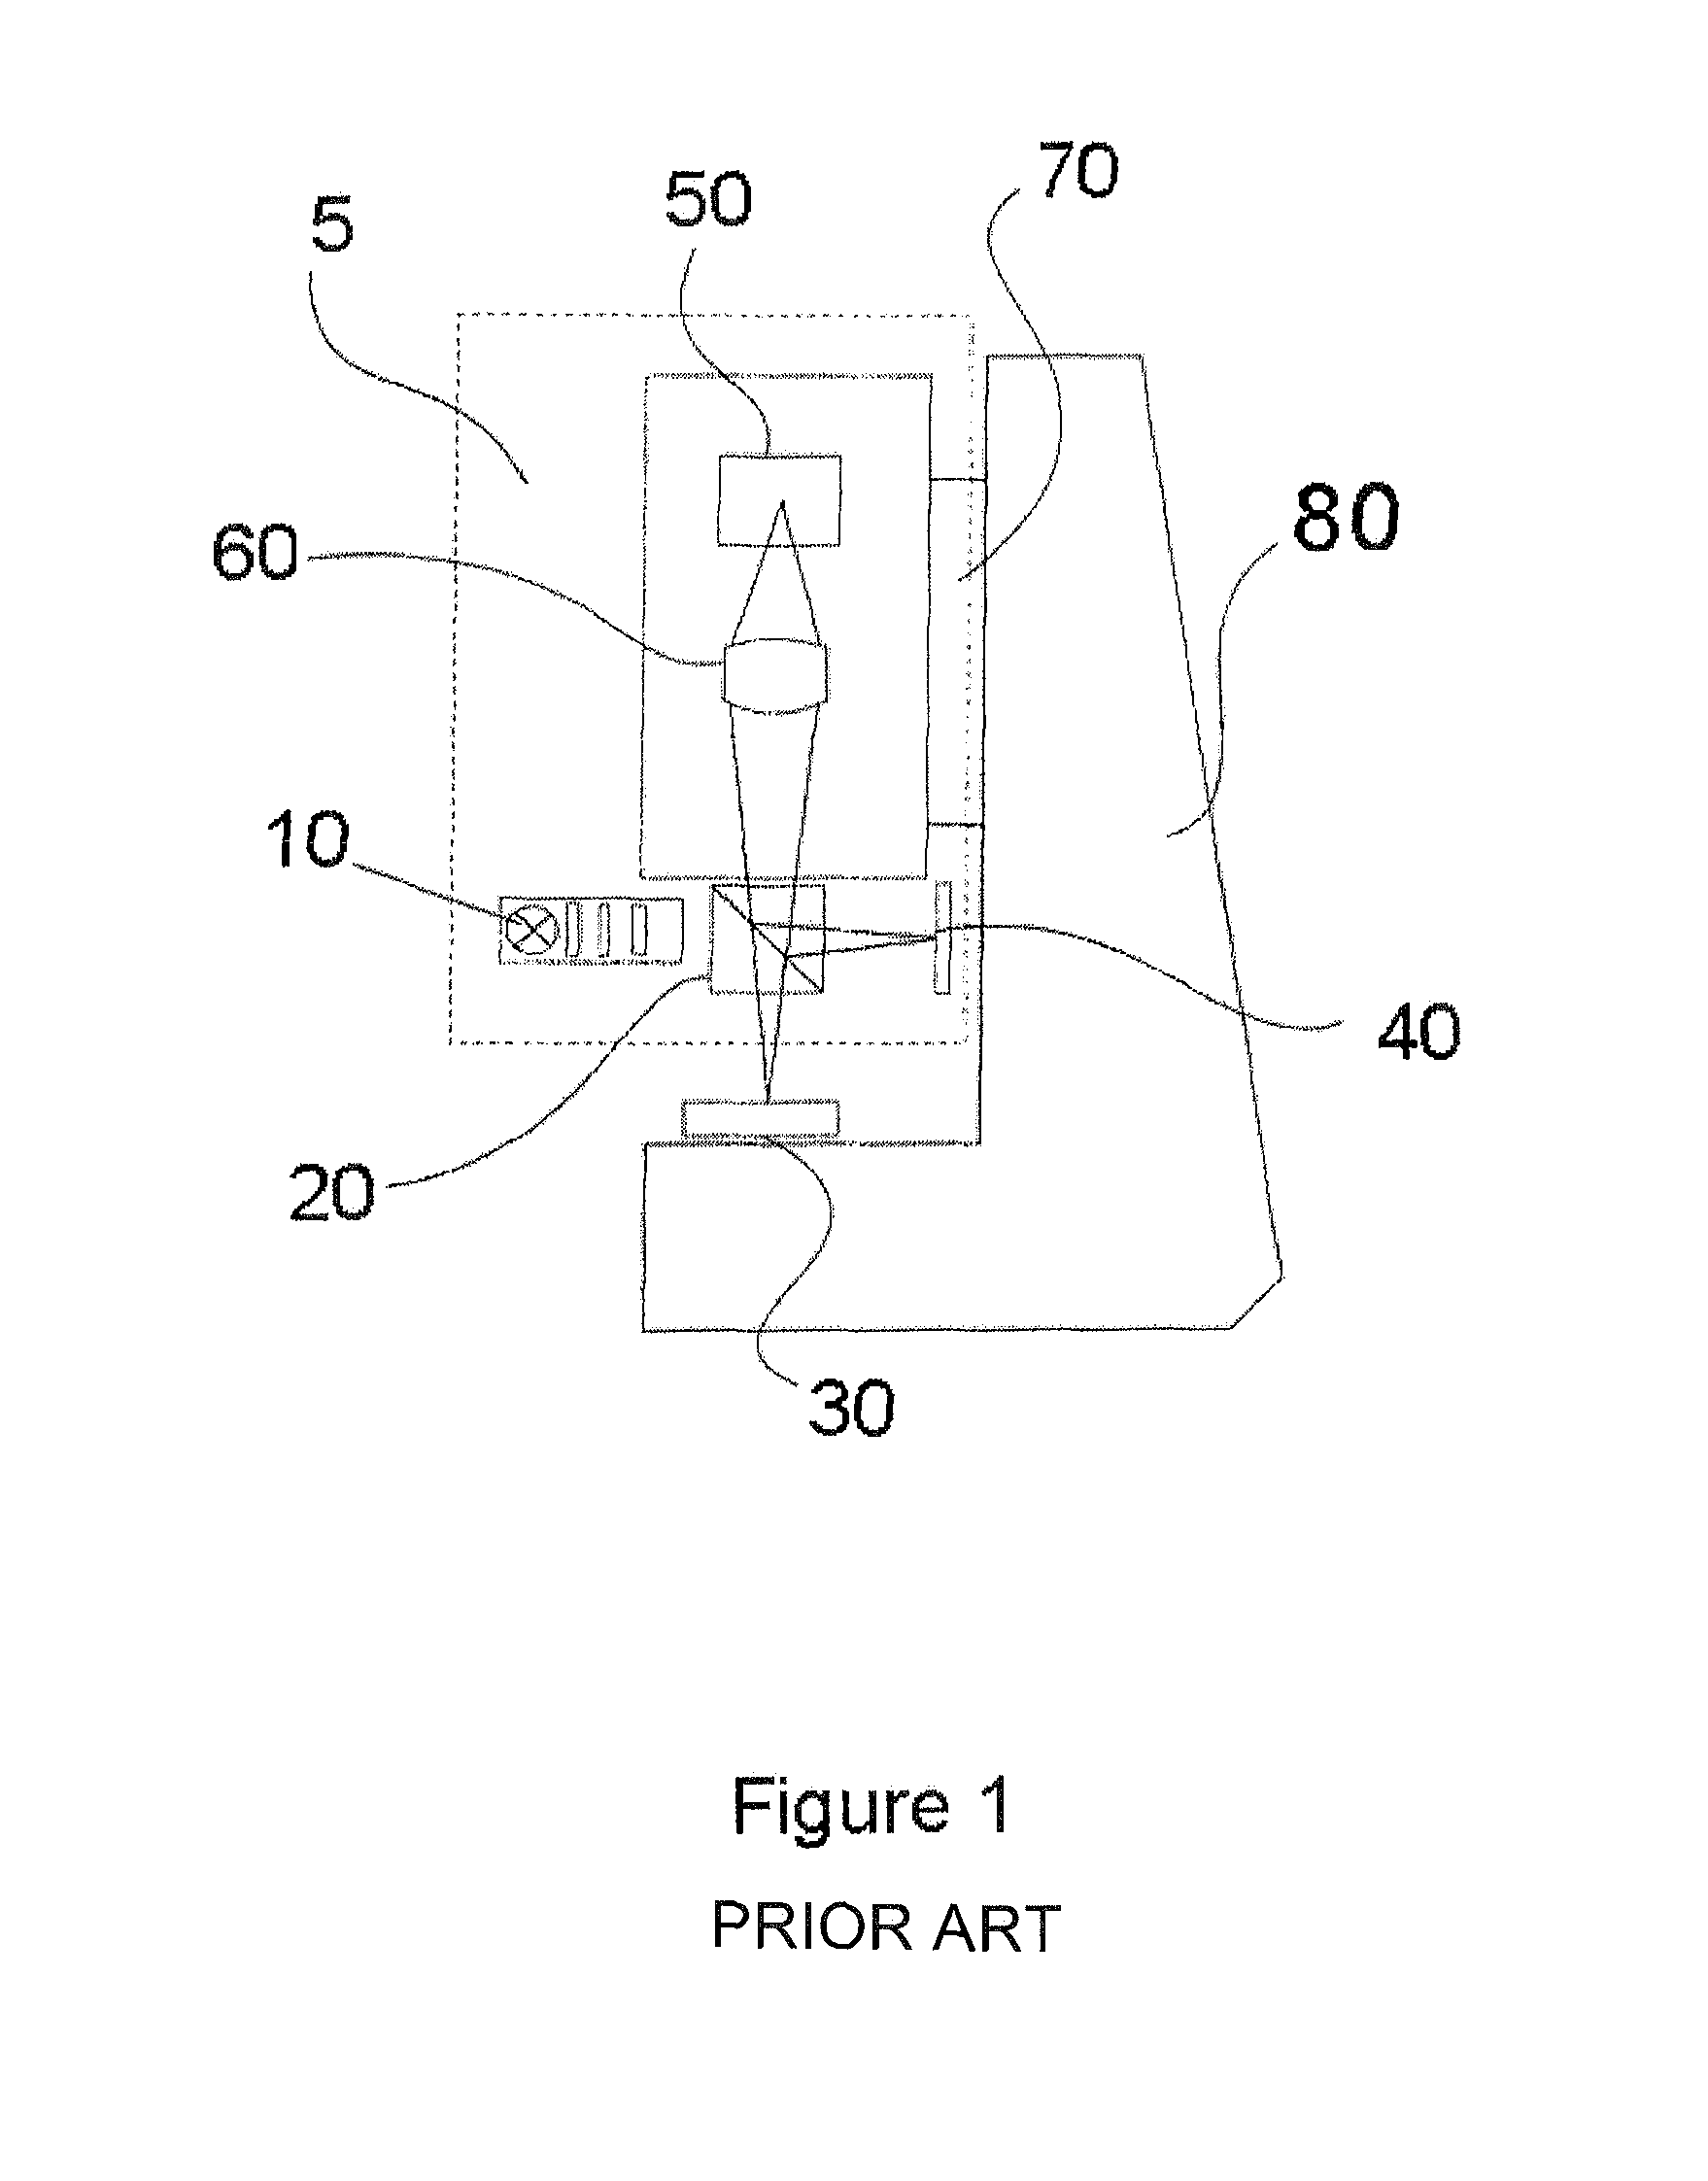 White light scanning interferometer with simultaneous phase-shifting module